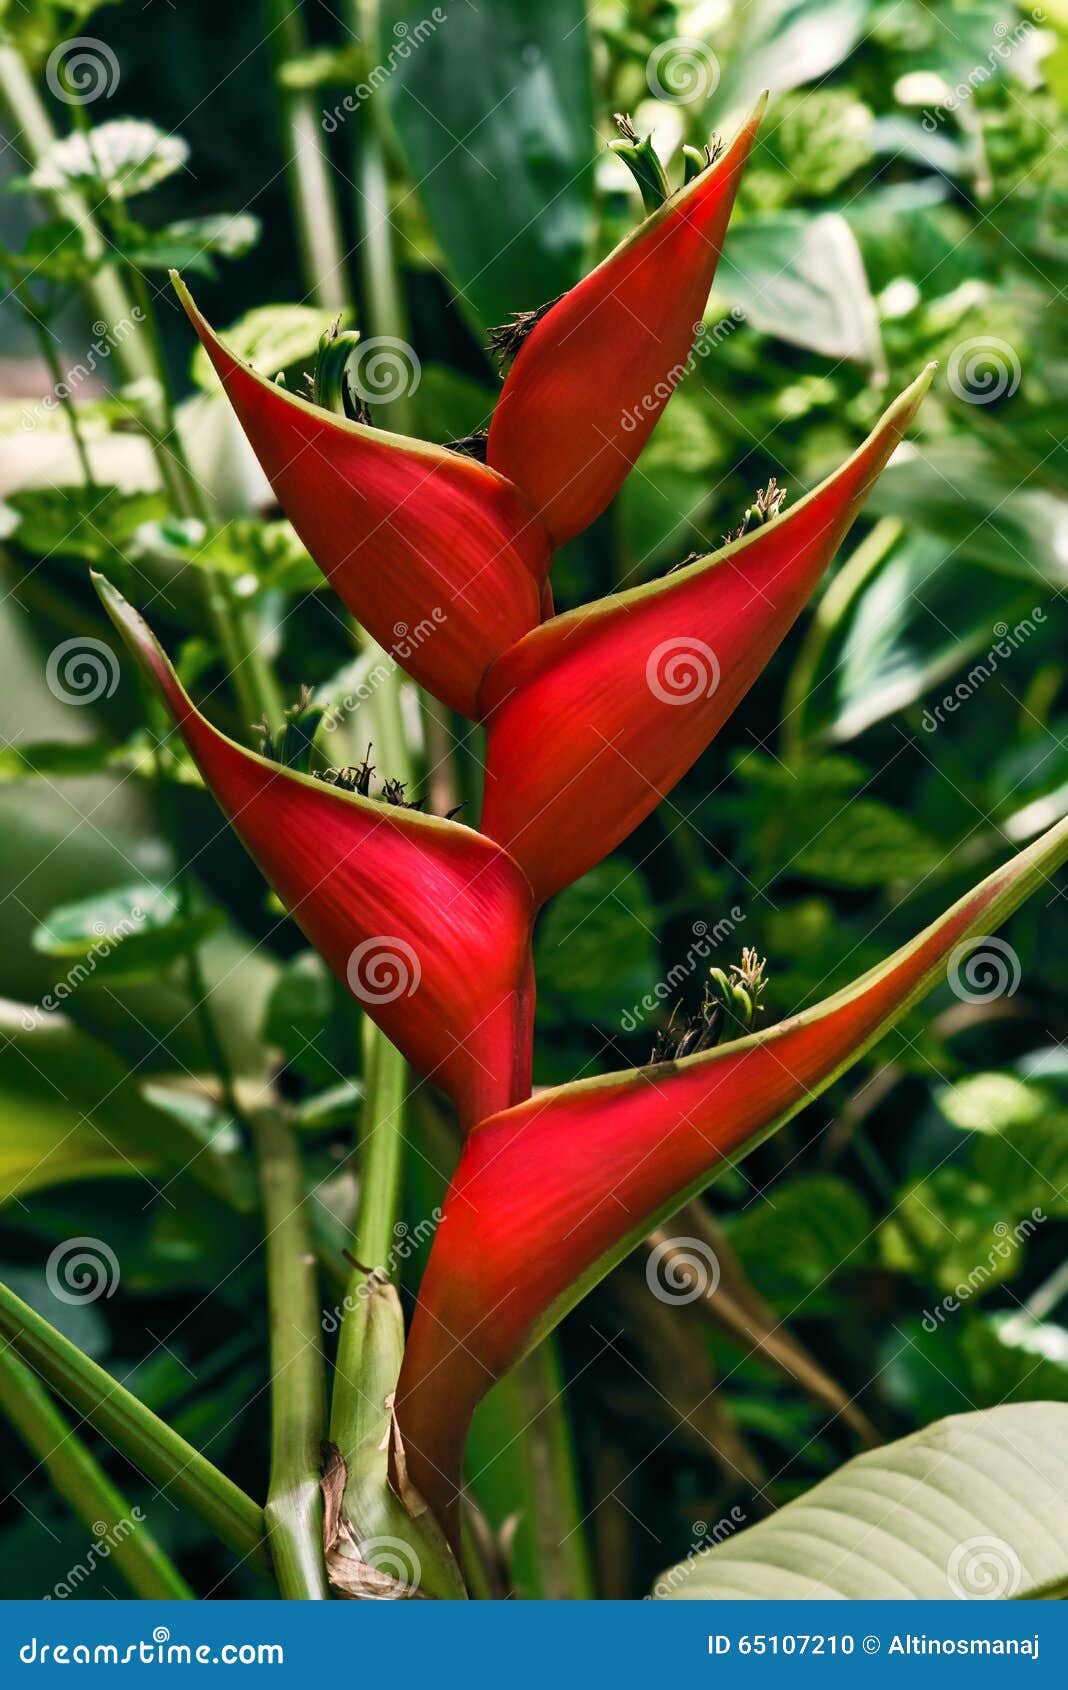 erect heliconia crab lobster claw tropical flower in the wild tobago jungle